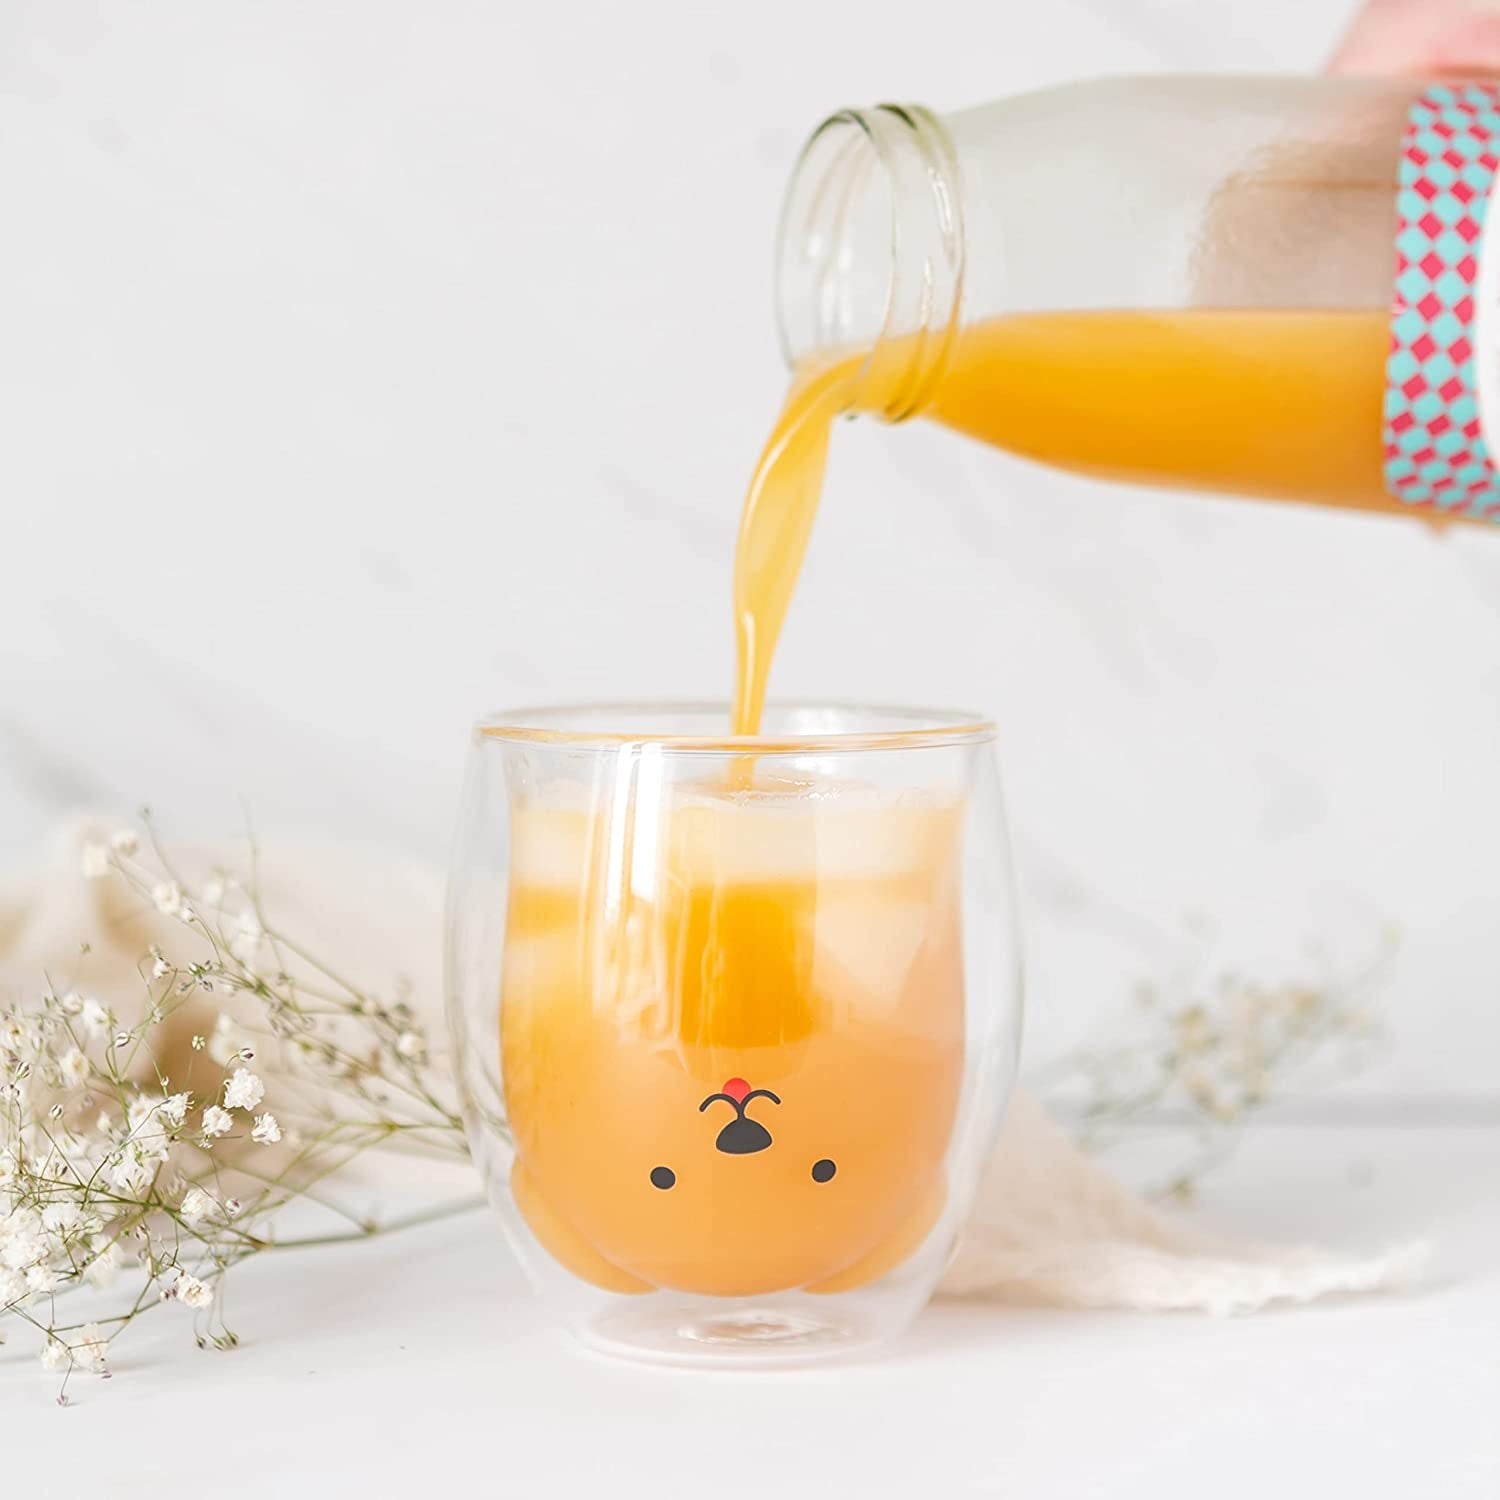 orange juice poured into glass with inner glass shaped like dog 